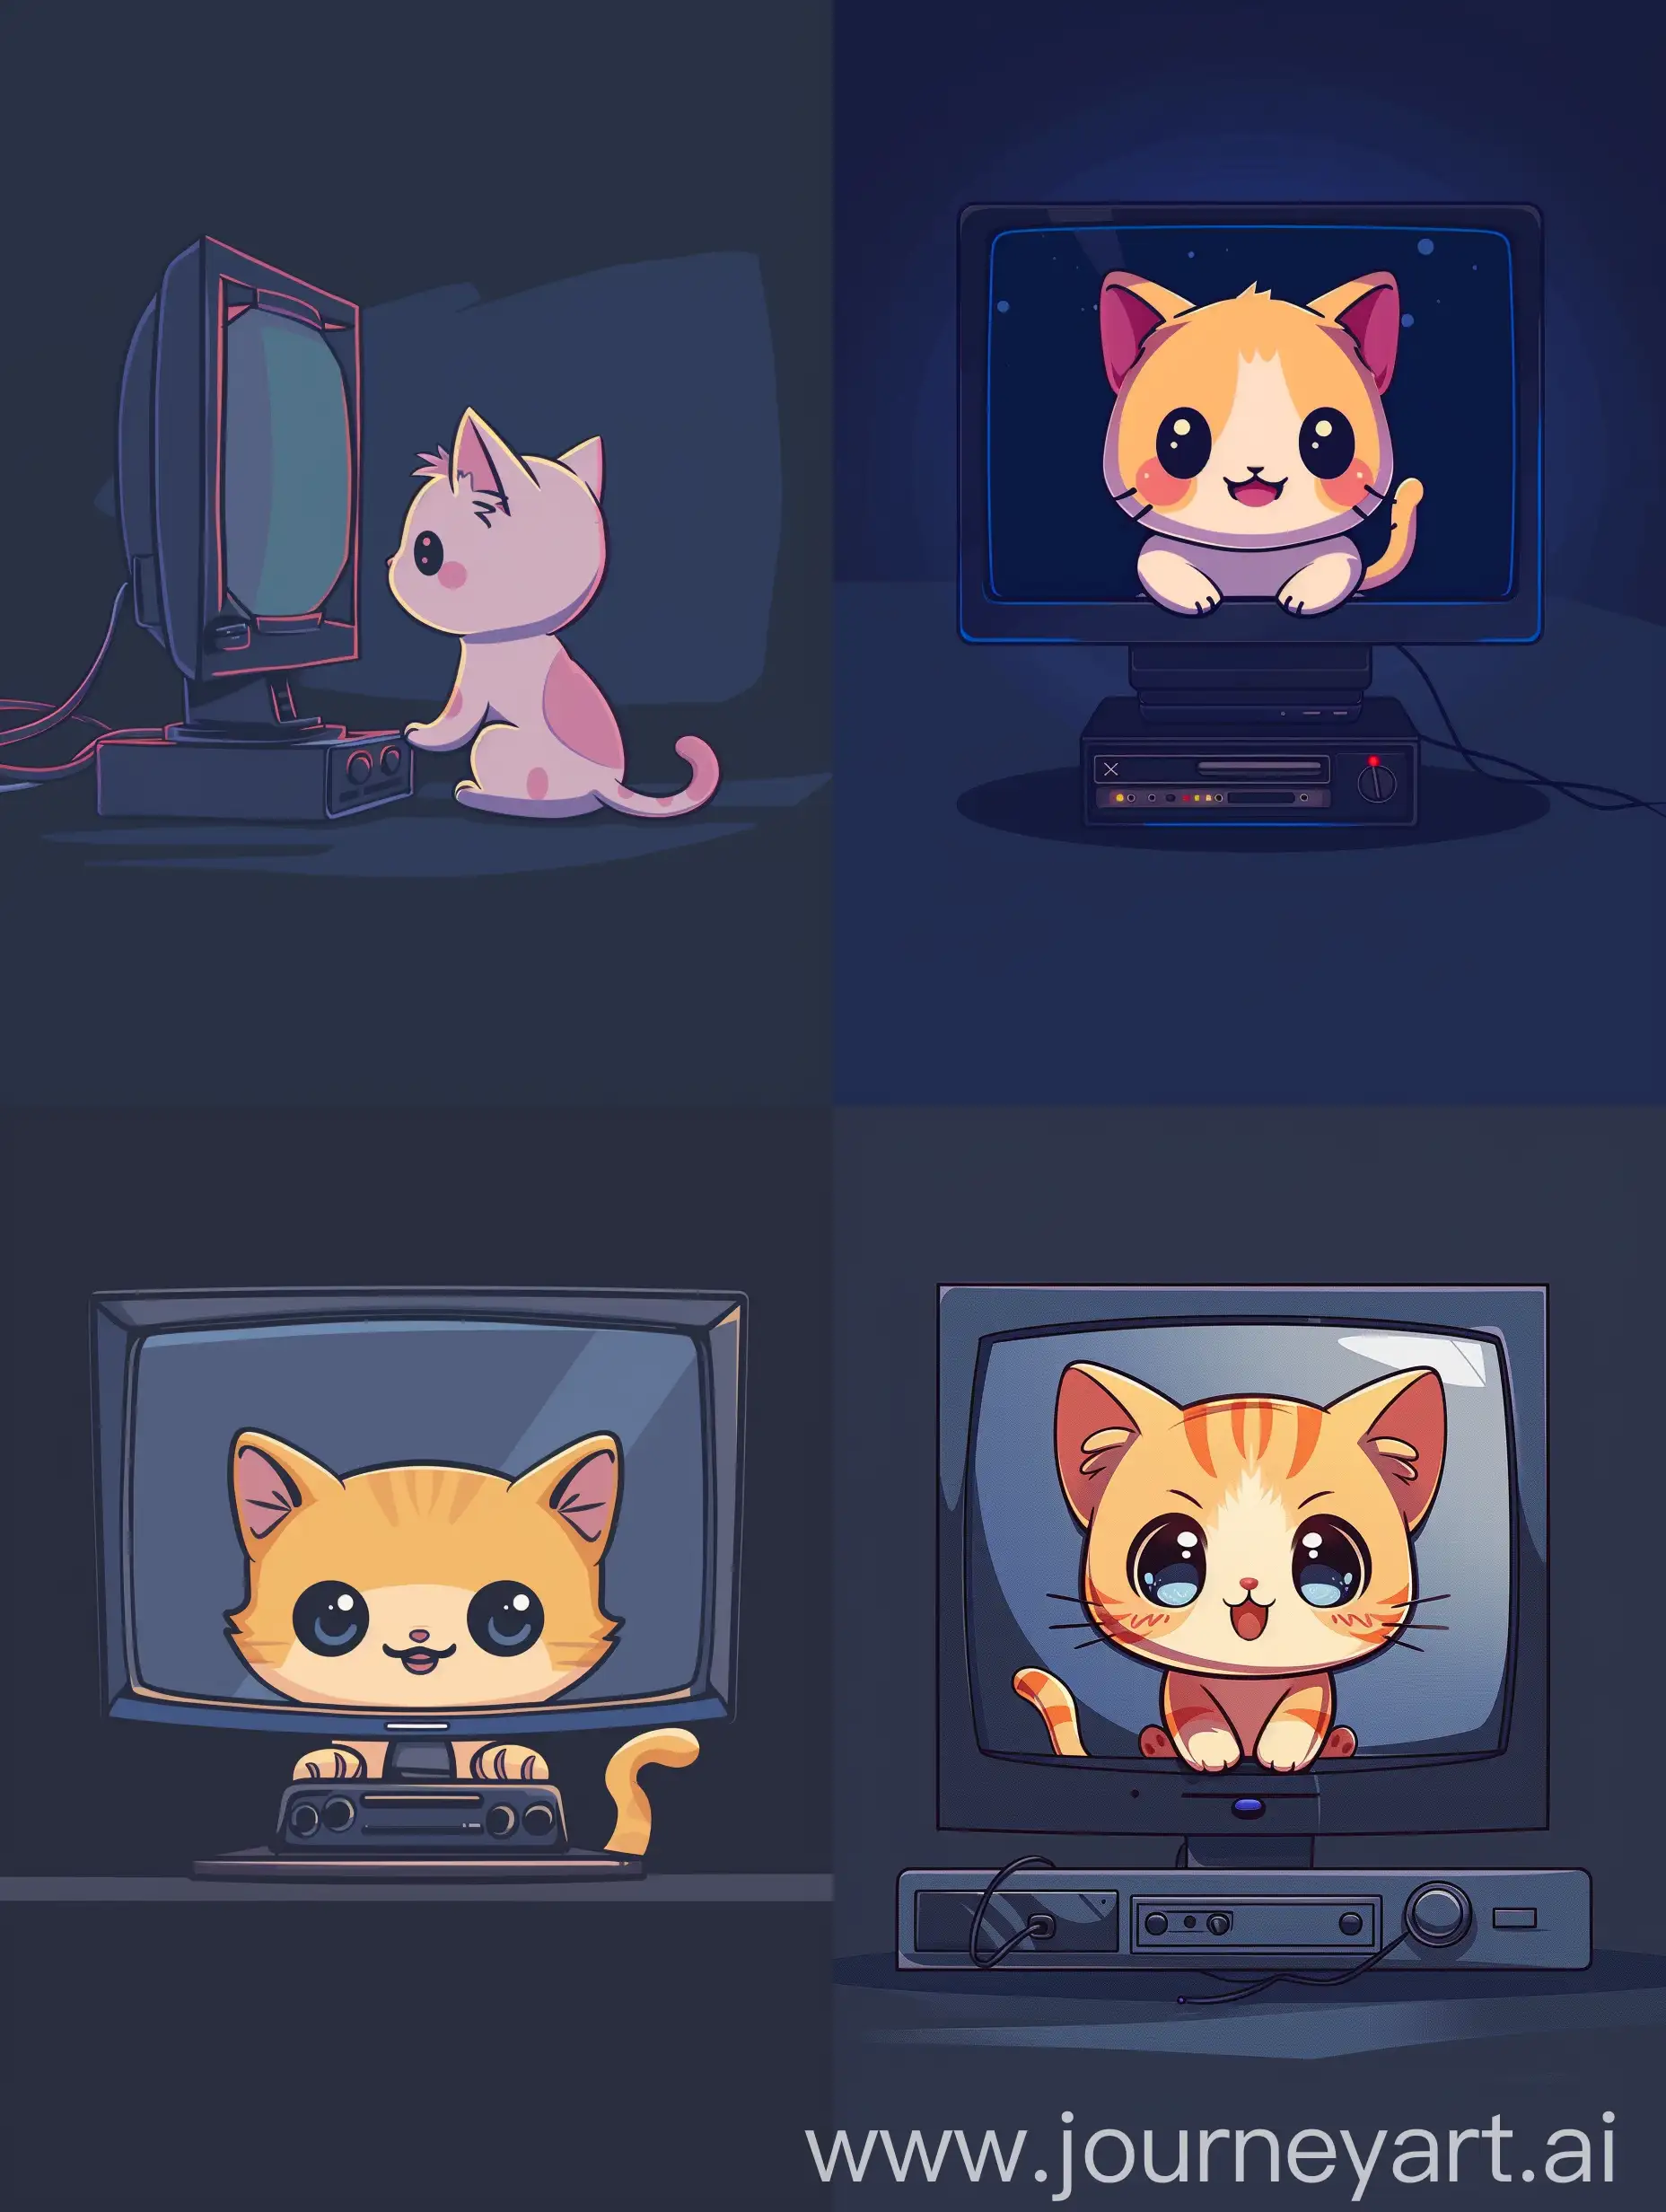 Chibi-Cute-Cat-Watching-TV-Adorable-Thin-Line-Style-Illustration-on-Dark-Blue-Background